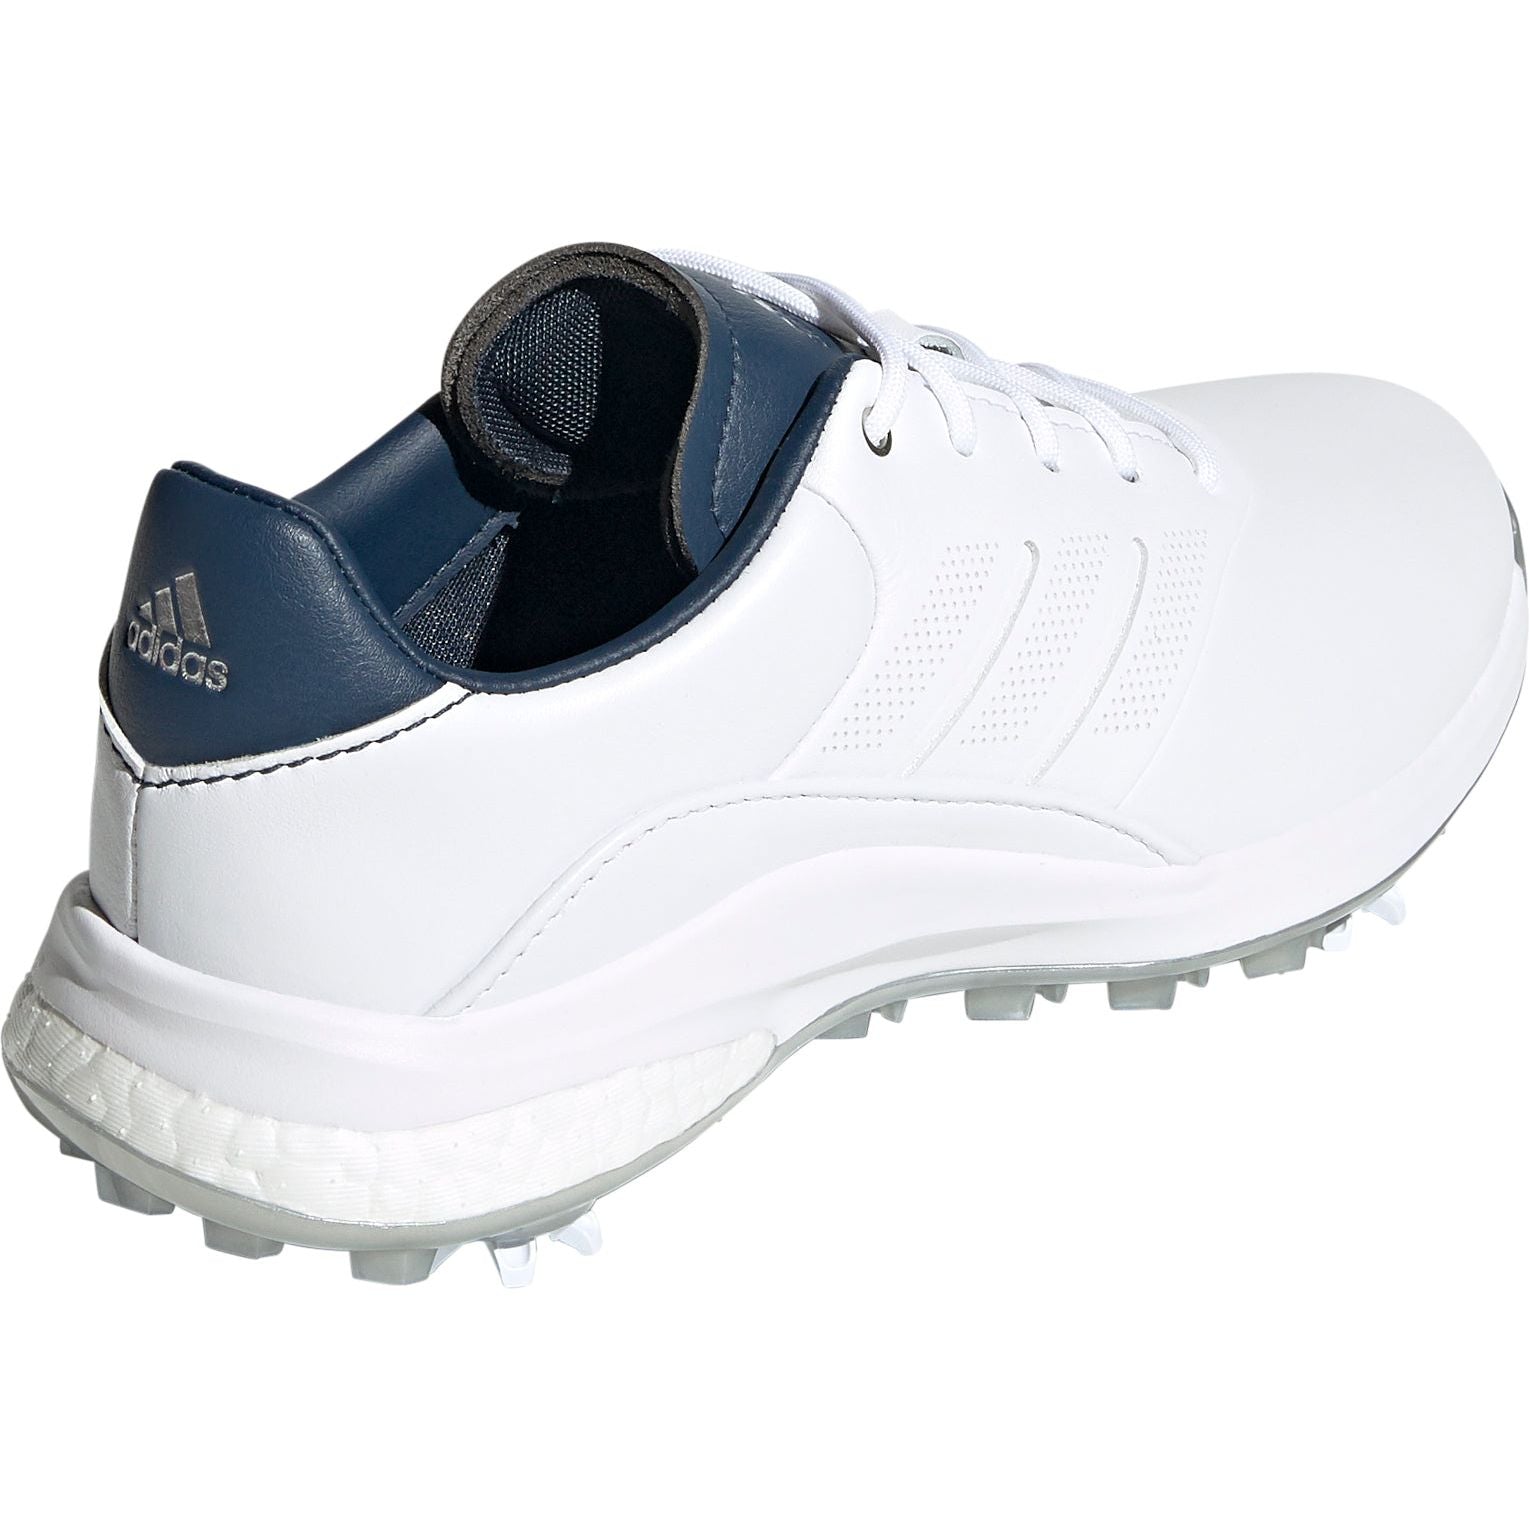 Adidas Performance Classic Golf Shoes Fx4330 Back View